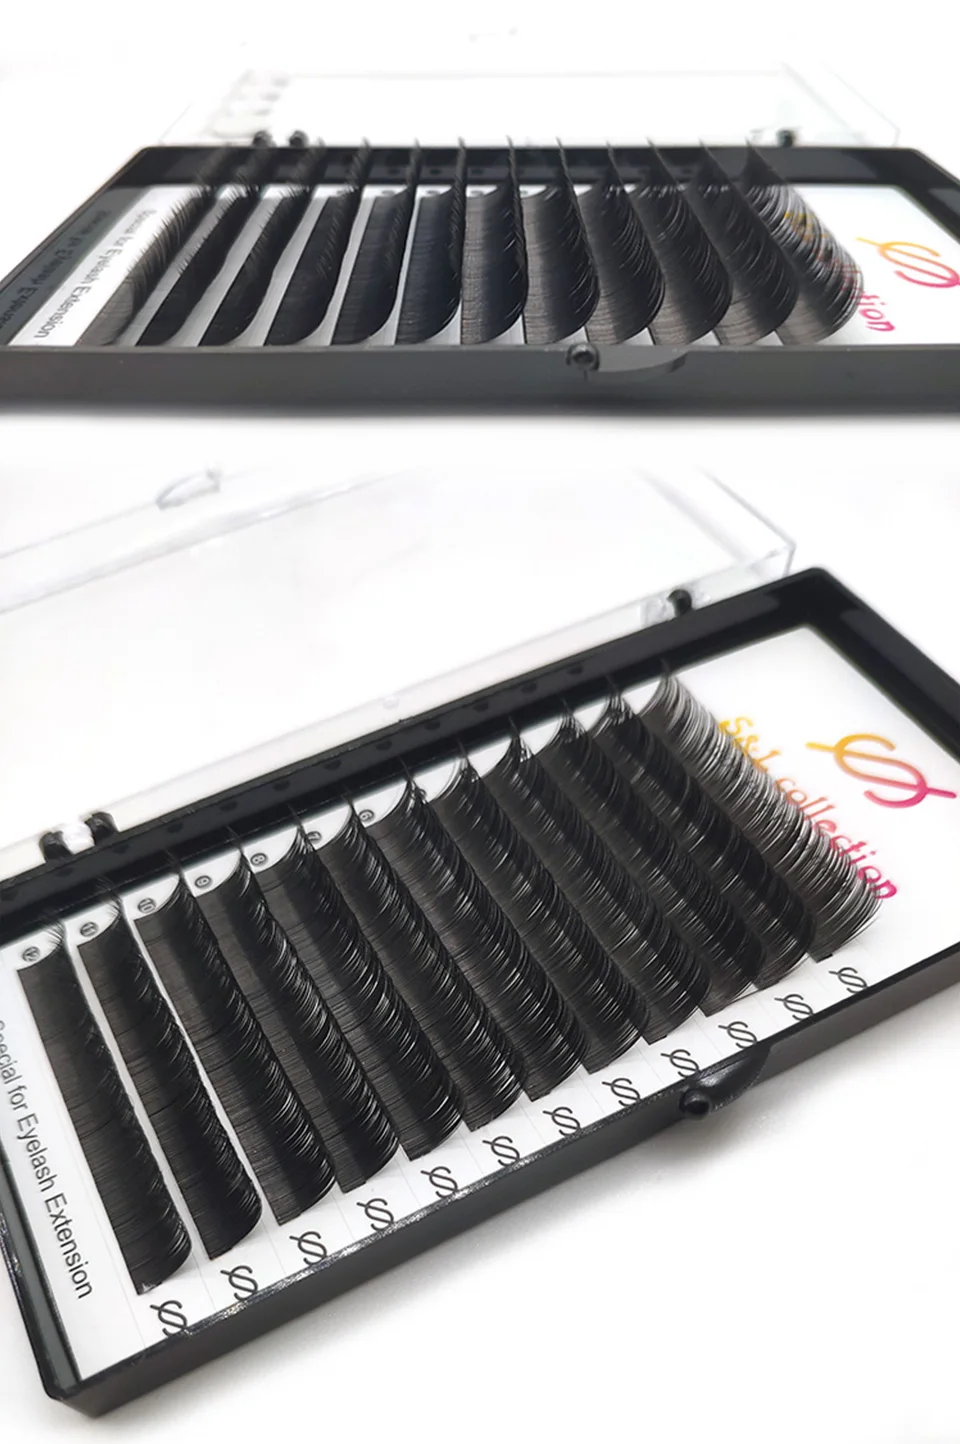 TPOK 16rows Case 18 19 20mm Long Style Length In One Tray Maquiagem Cilios Silk Natural Individual Eyelash Extension Cosplay Make-up -Outlet Maid Outfit Store H4804ef11230142feb2ce8f7b85f397dfI.jpg